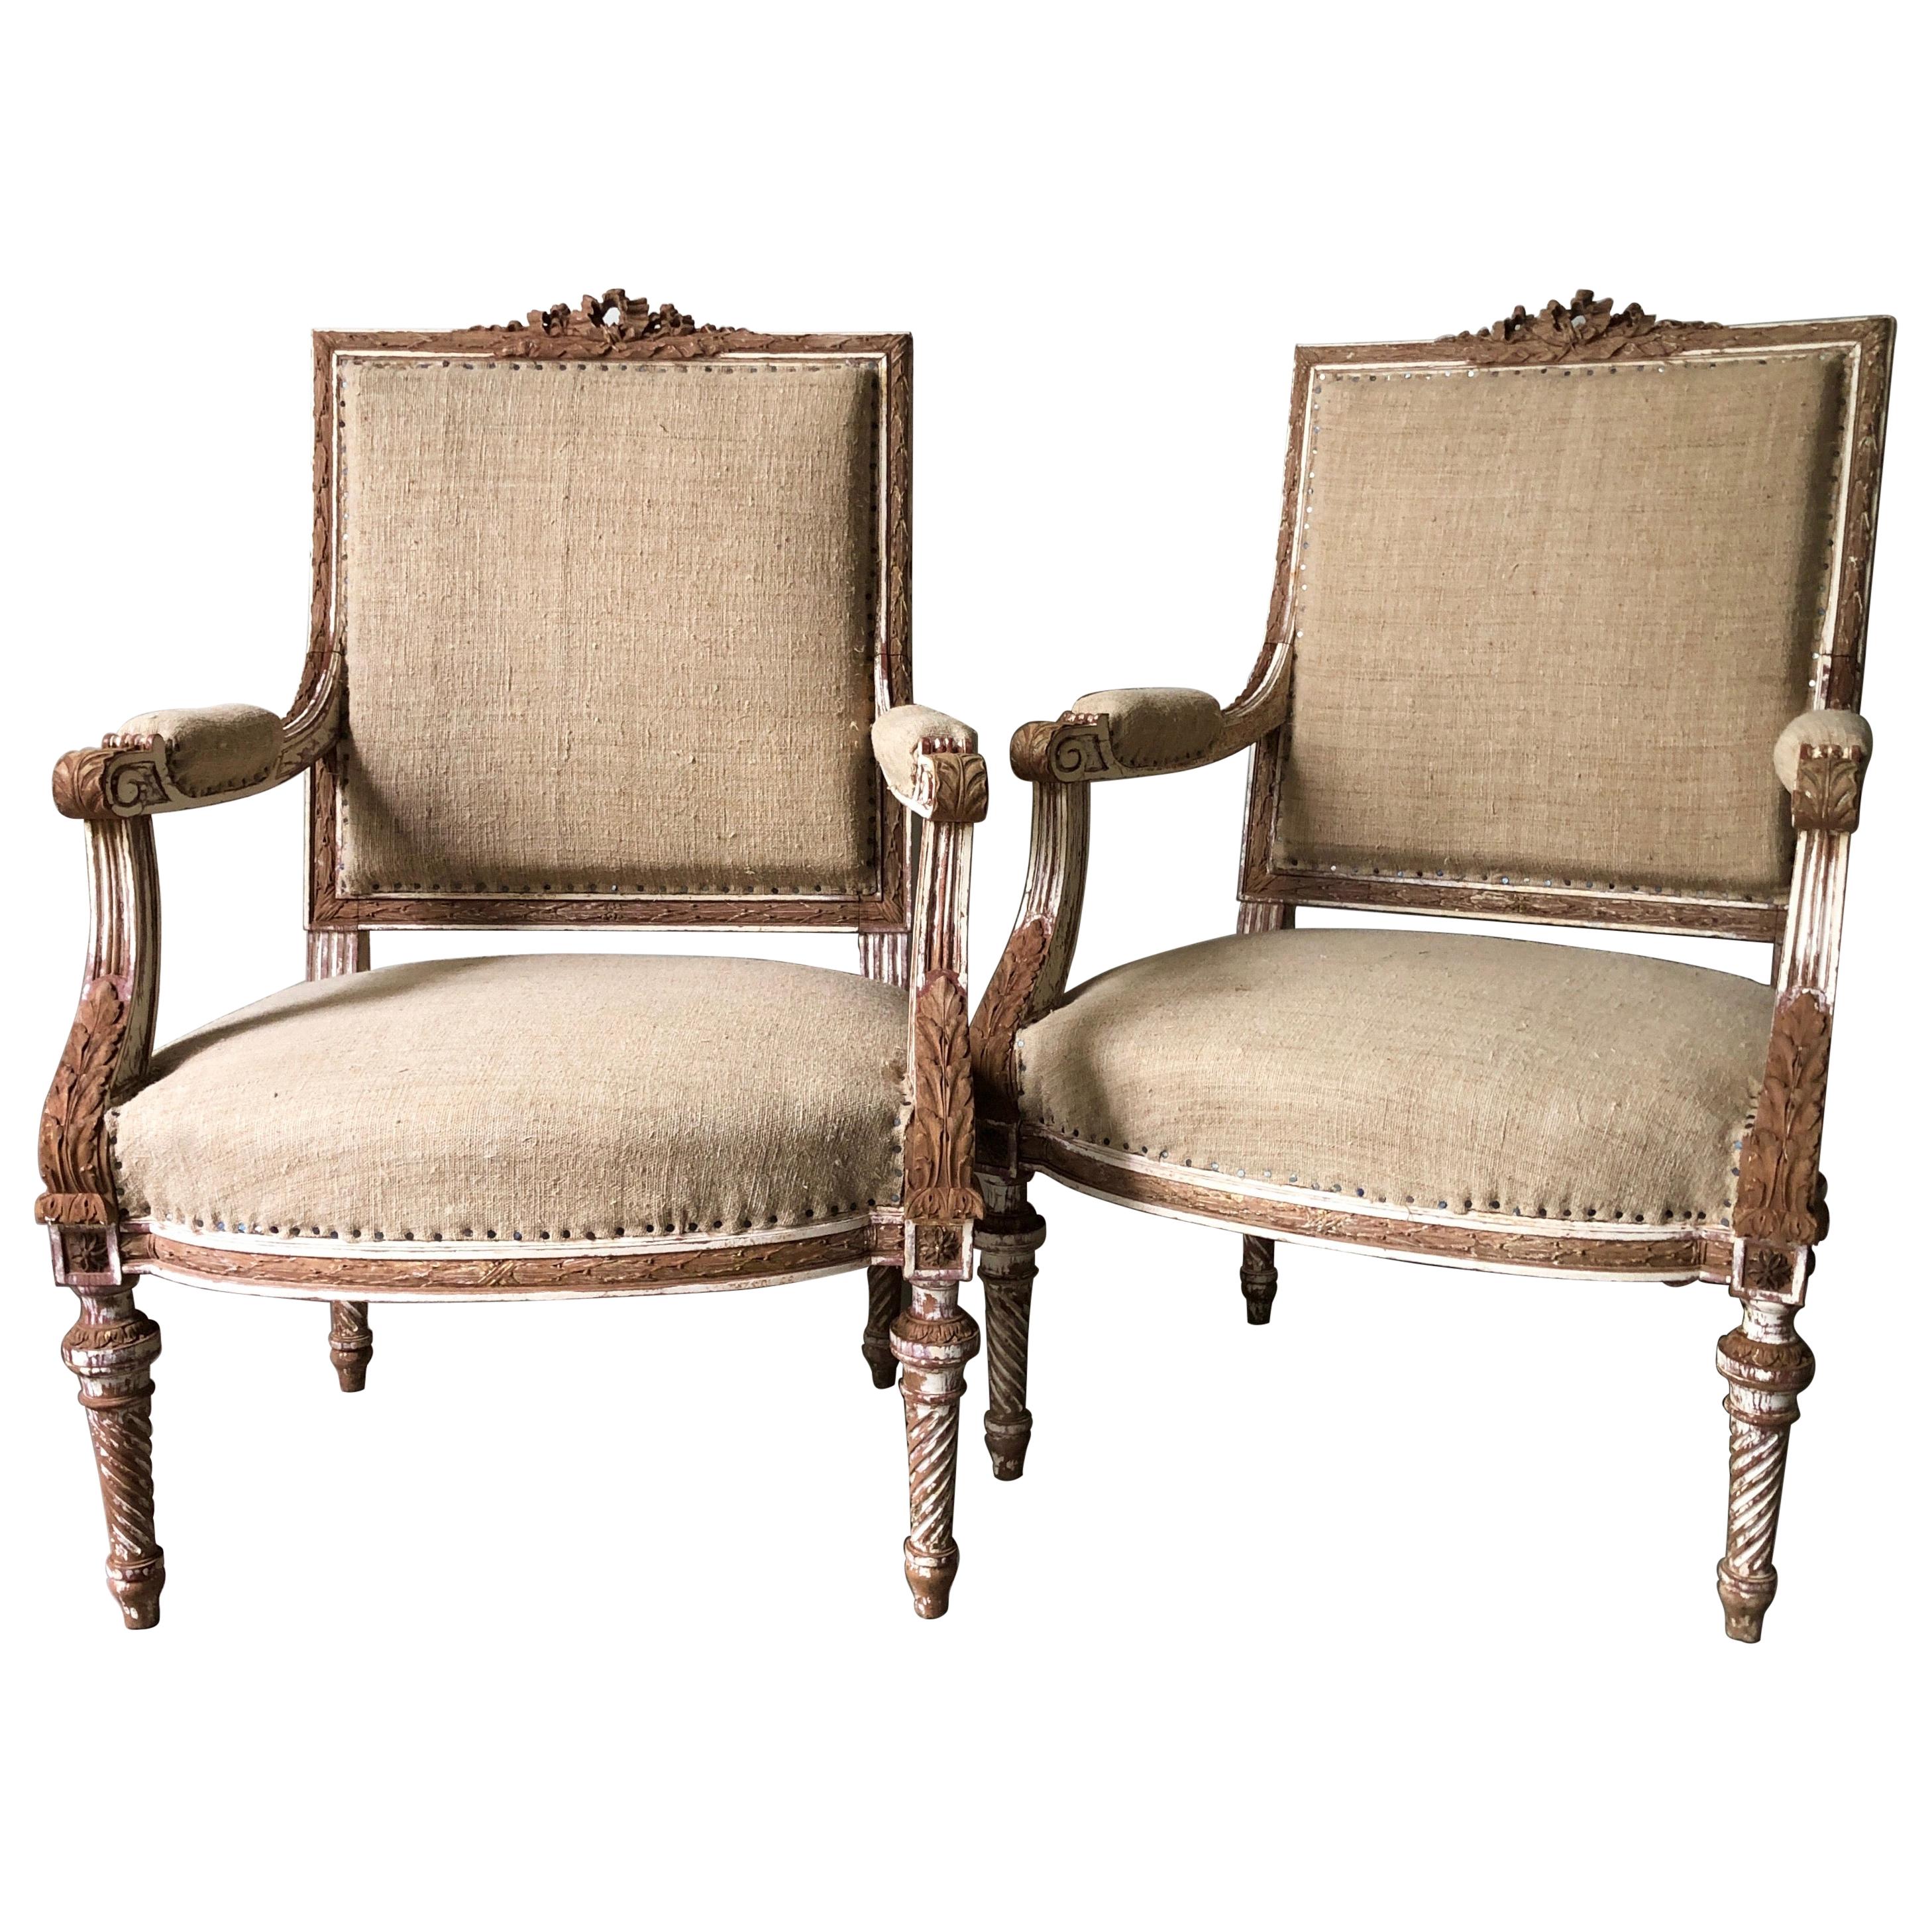 Pair of 19th Century French Louis XVI Style Square Back Armchairs